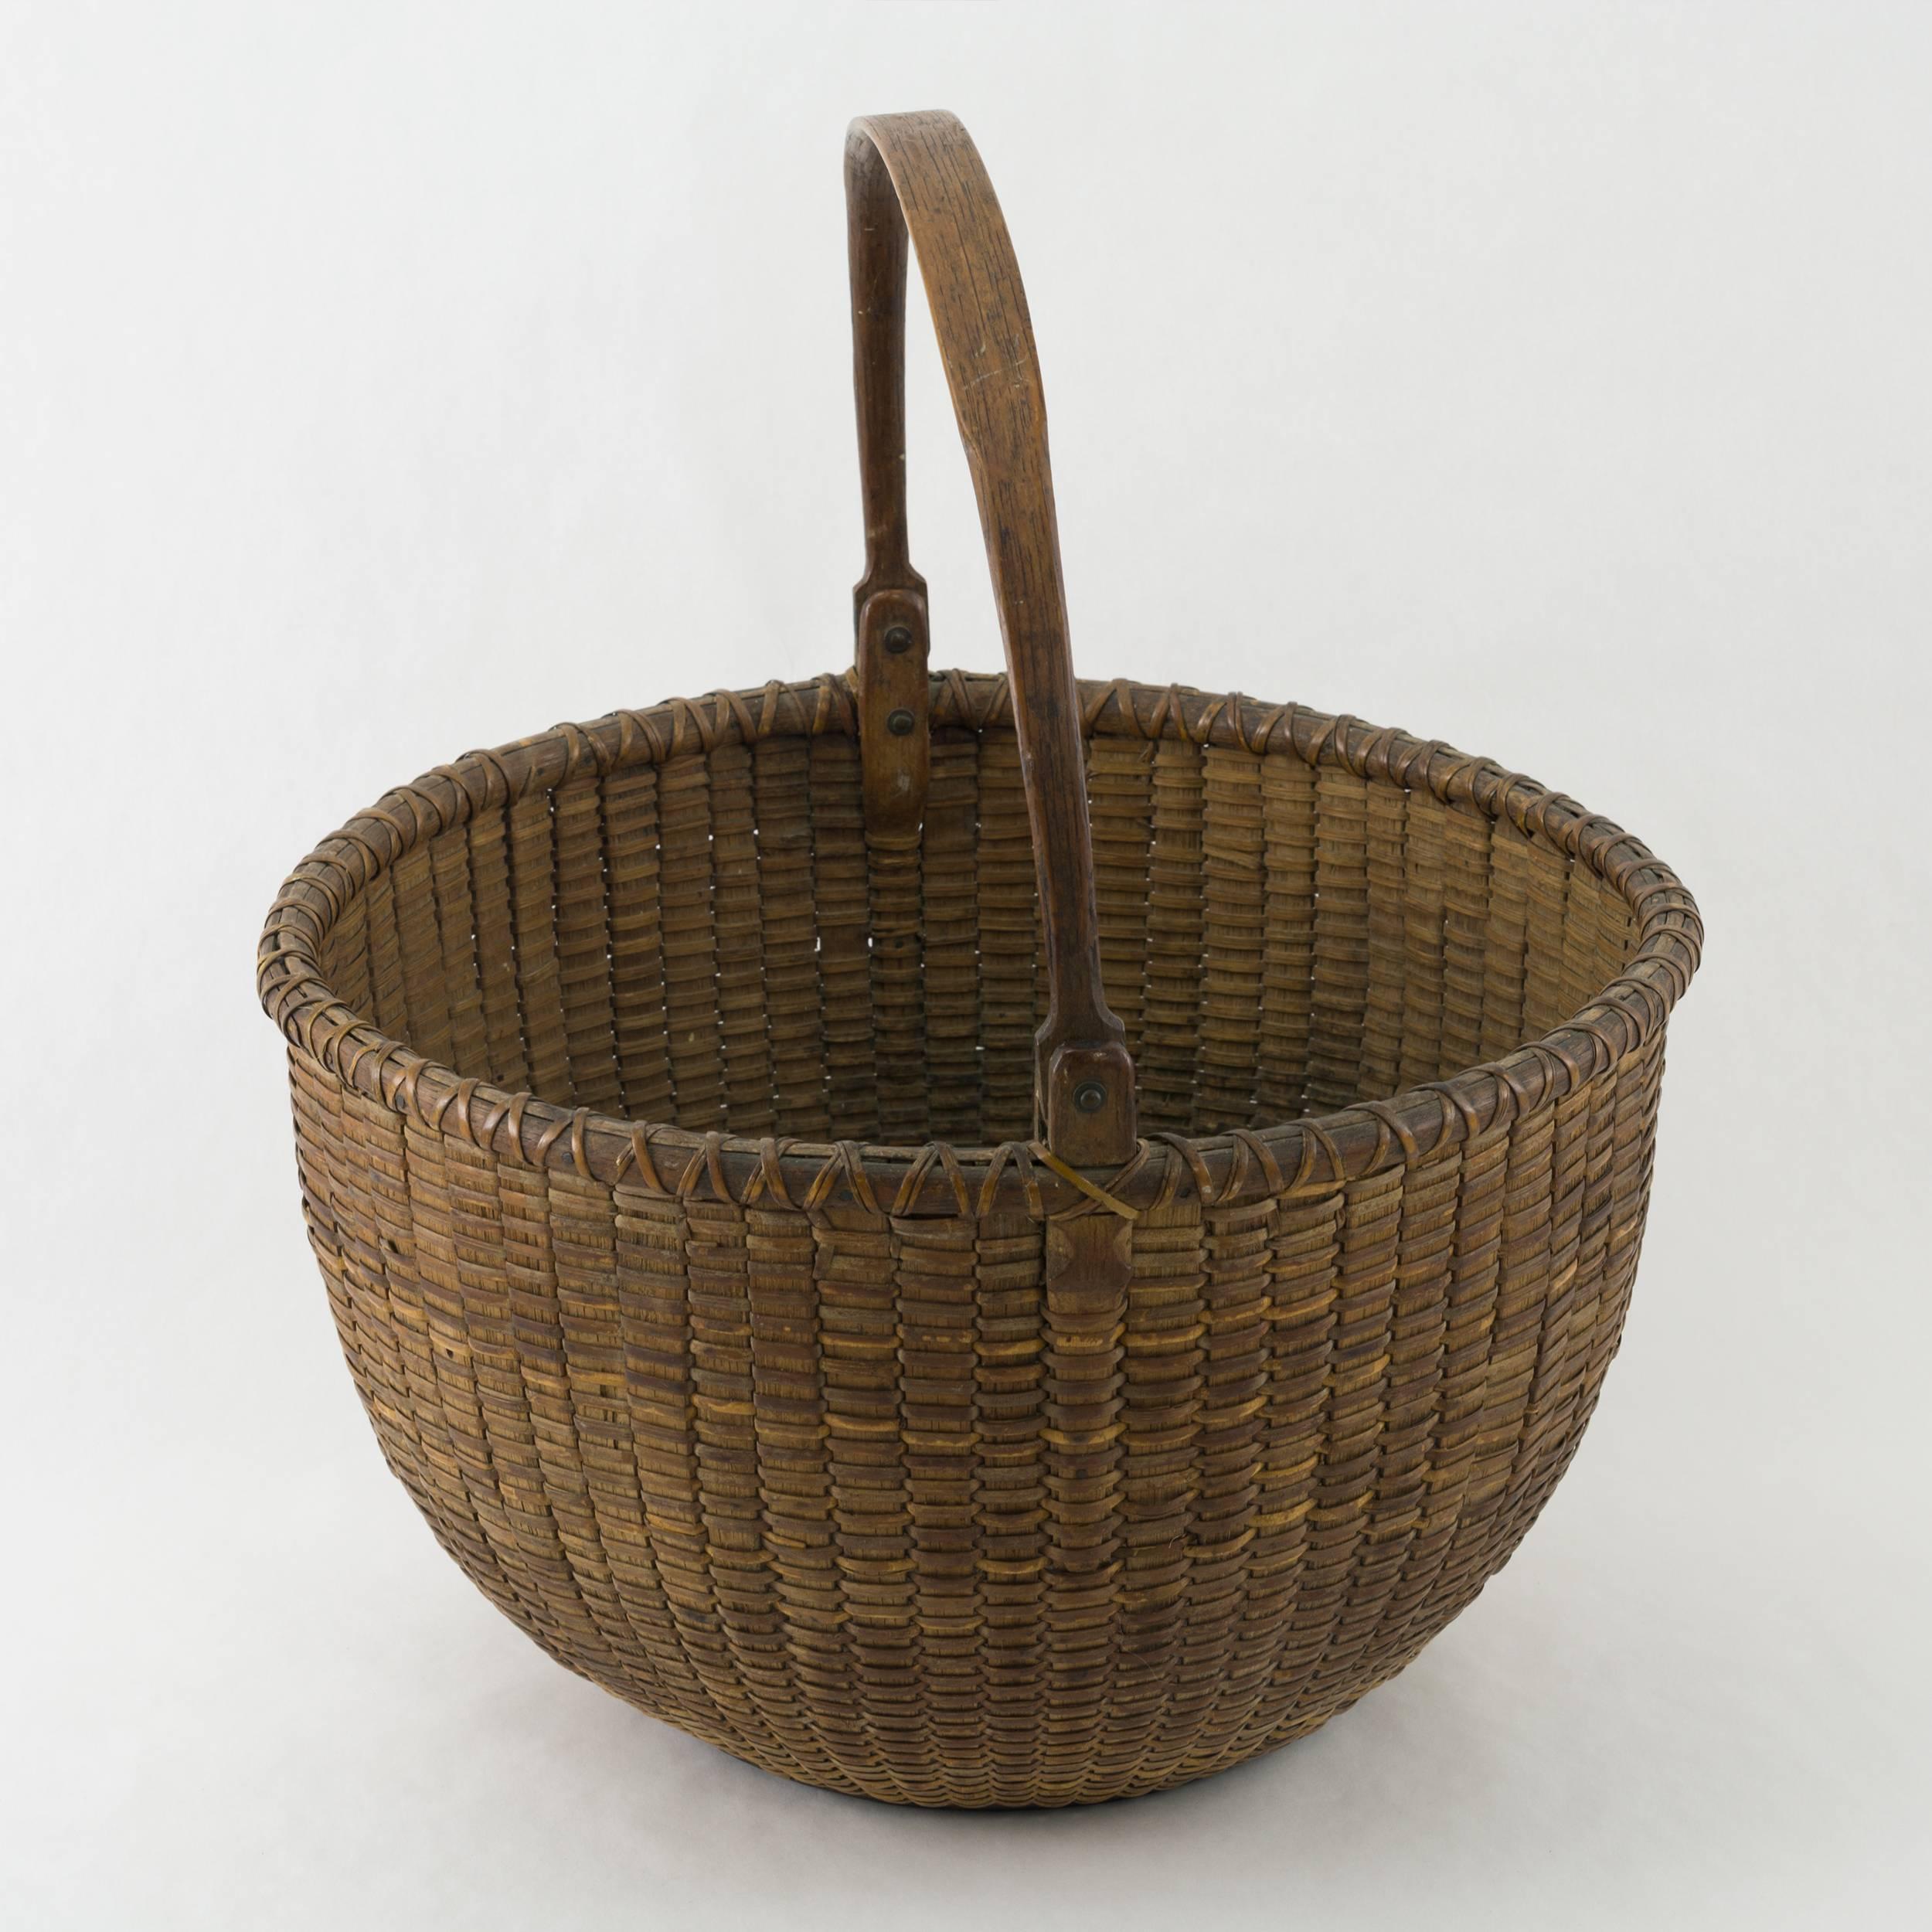 19th Century Open Round Nantucket Lightship Basket Made by Capt. James Wyer